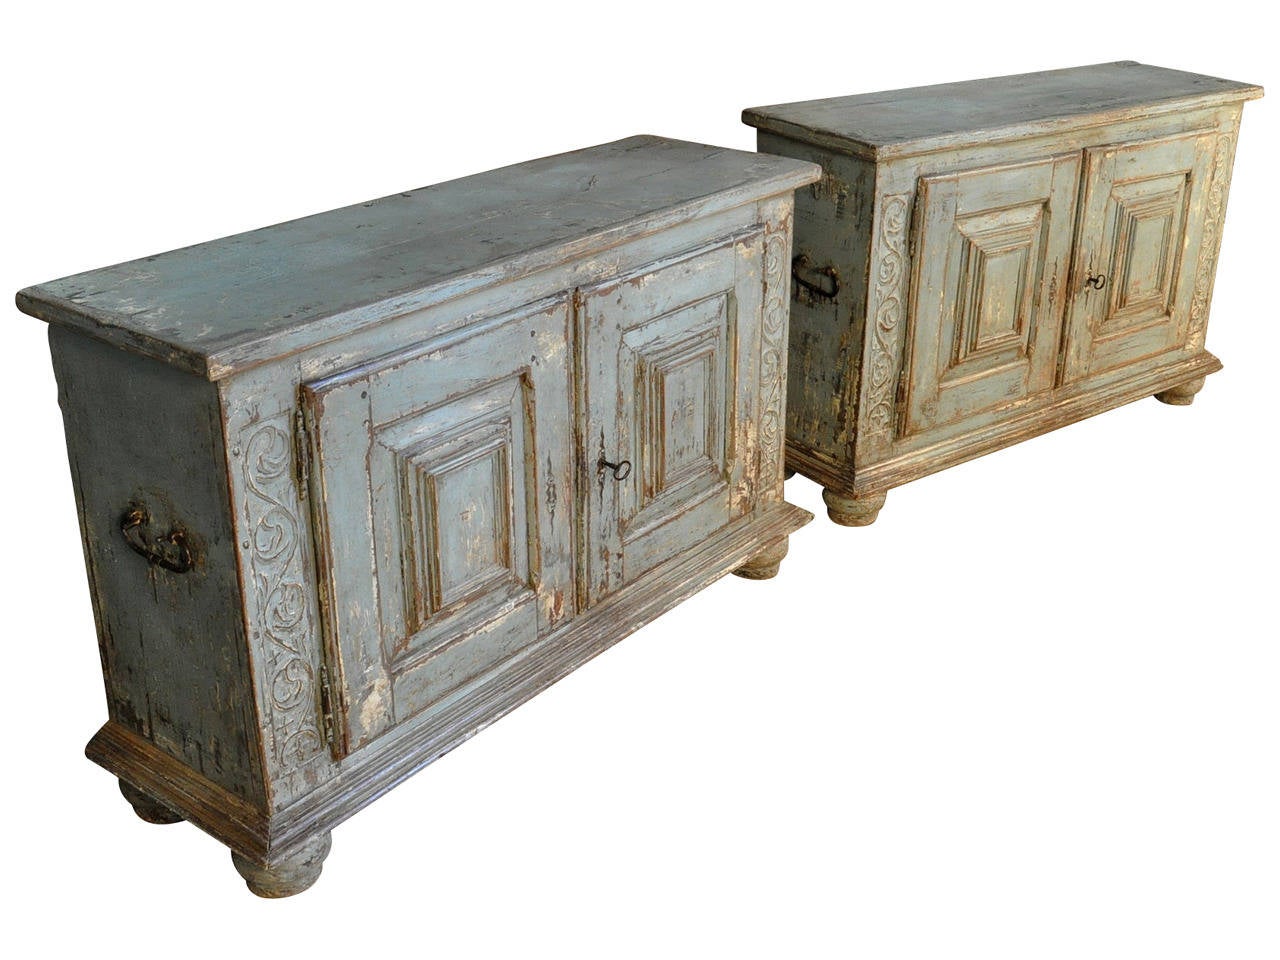 An outstanding pair of 17th century painted buffet from the Catalan region of Spain.  Nice carved detailing along with substantially molded door panels, iron handles to the sides resting on large bun feet.  These cabinets are in wonderfully sound